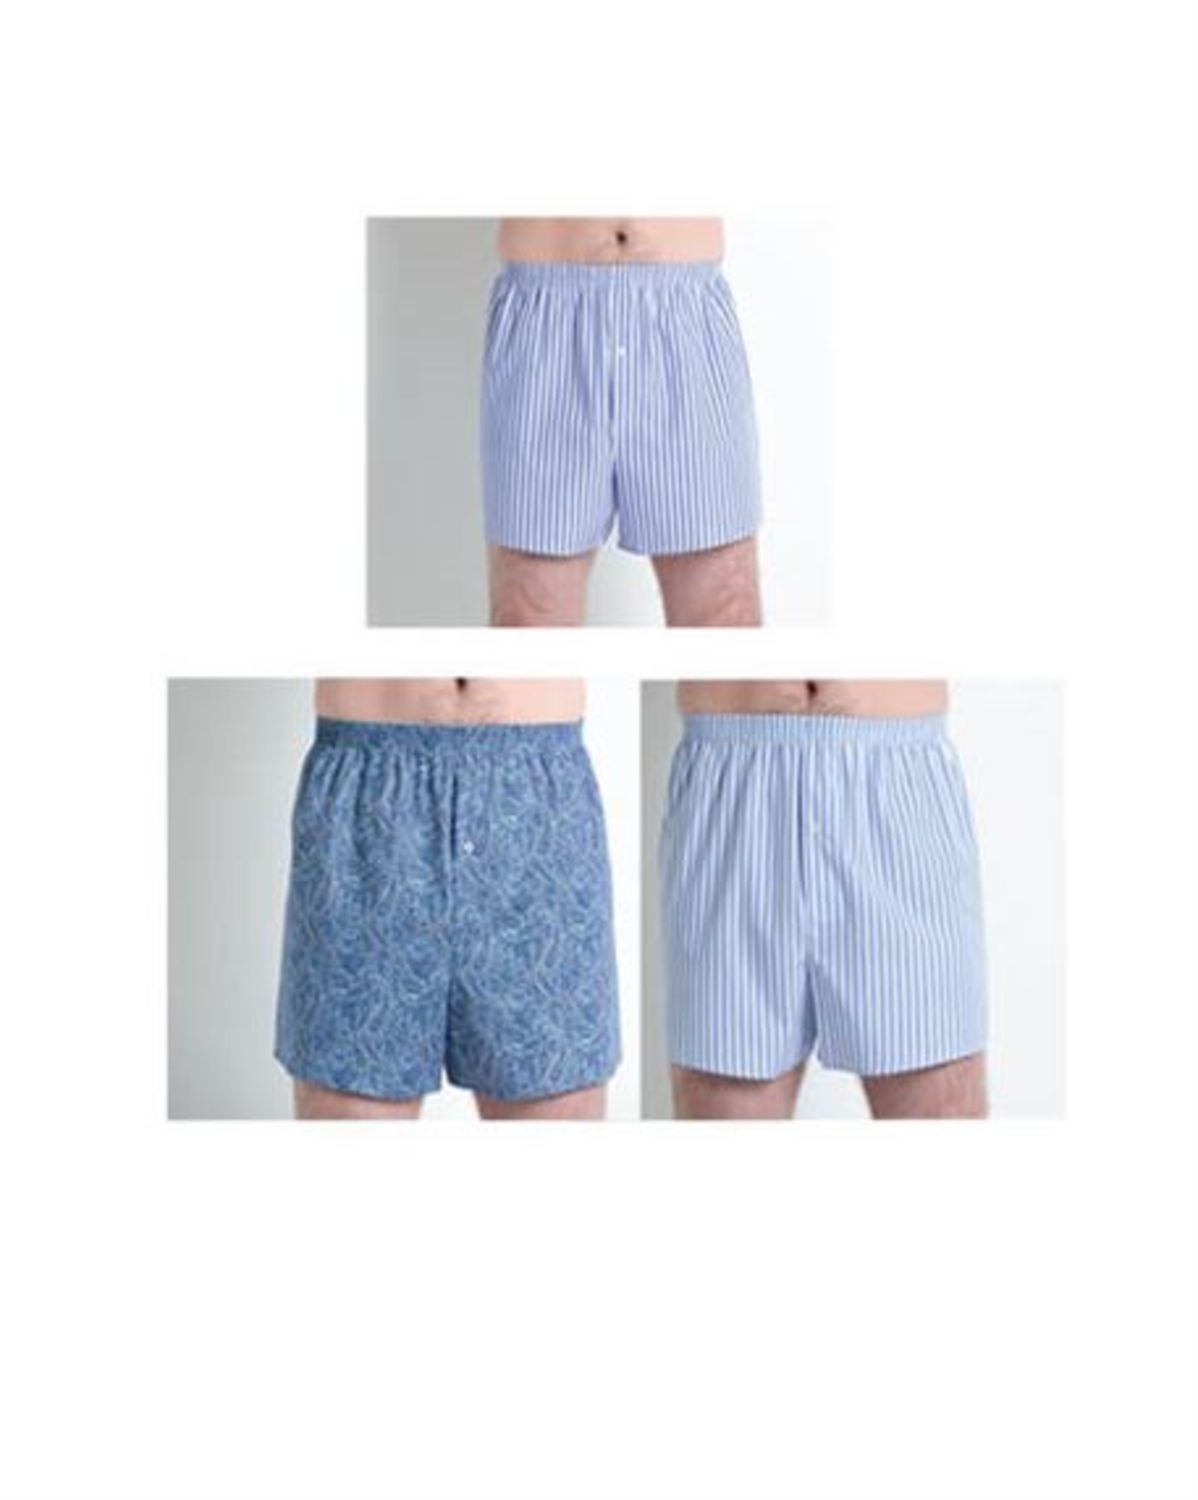 Mens Pack of 3 Cotton Boxer Shorts. Available in Light or Dark.